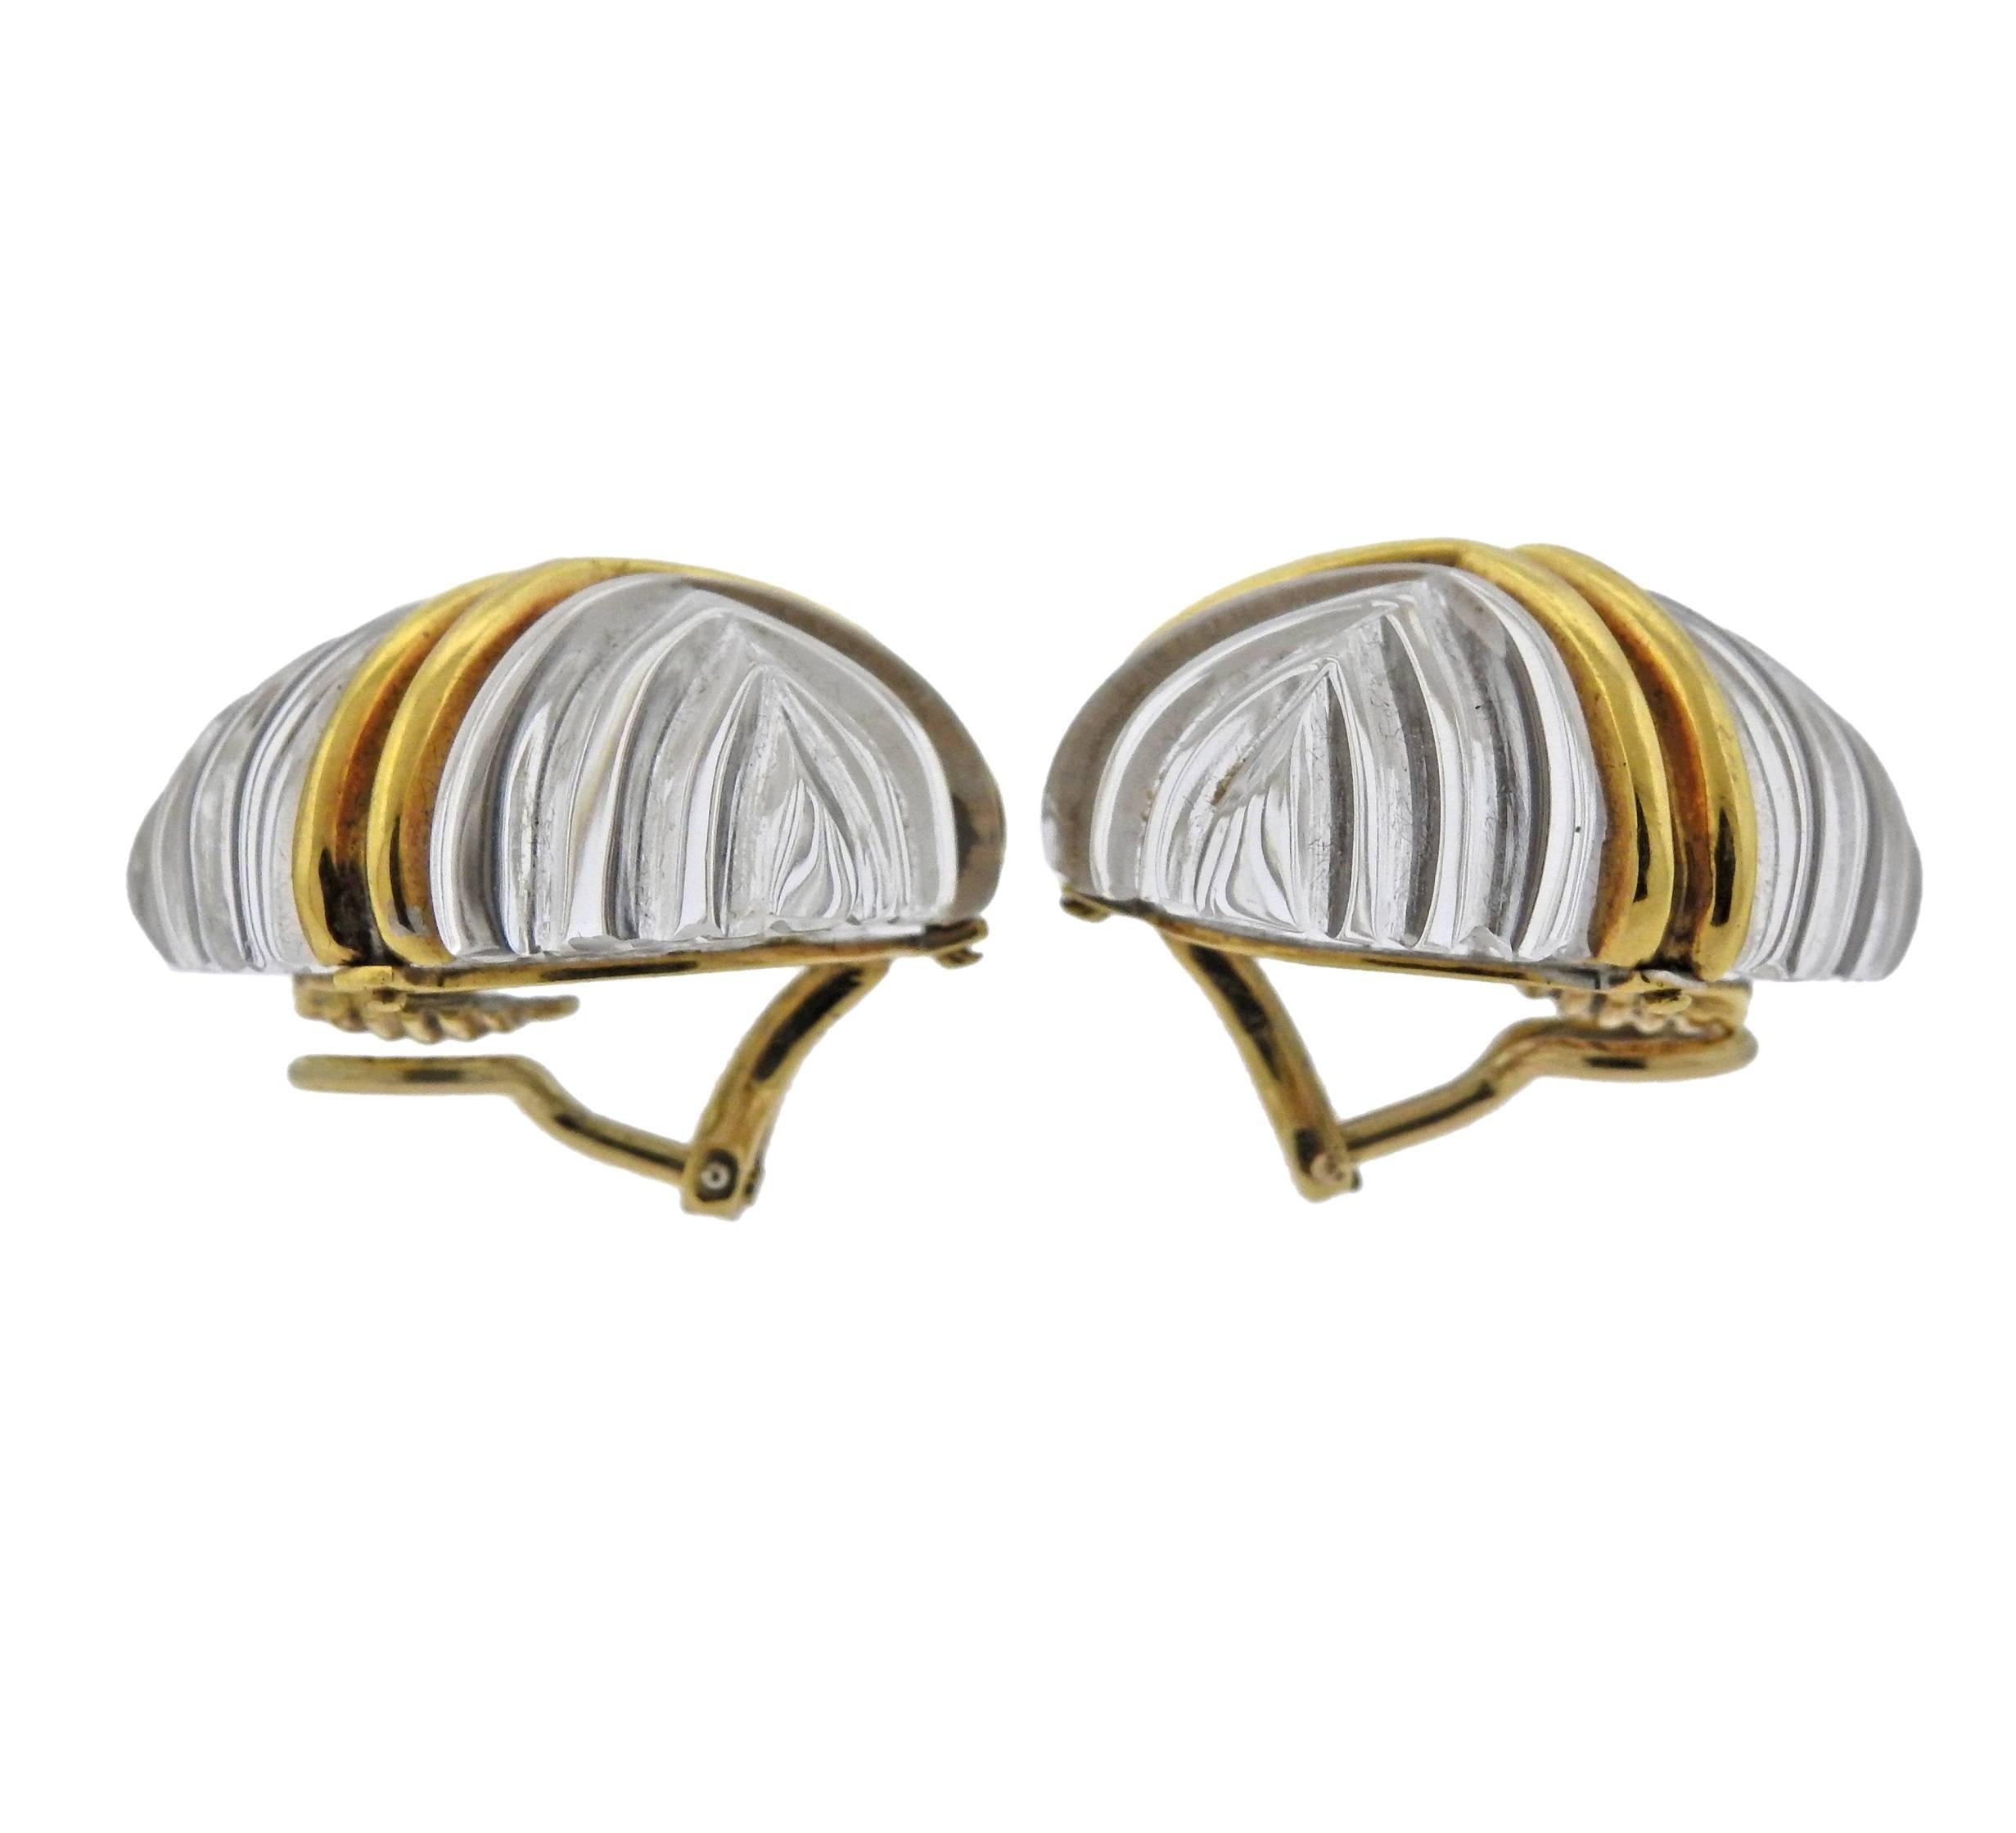 Pair of 18k yellow gold earrings, set with carved crystal. Earrings are 27mm x 27mm, marked: T, 18k. Weight - 32.6 grams.